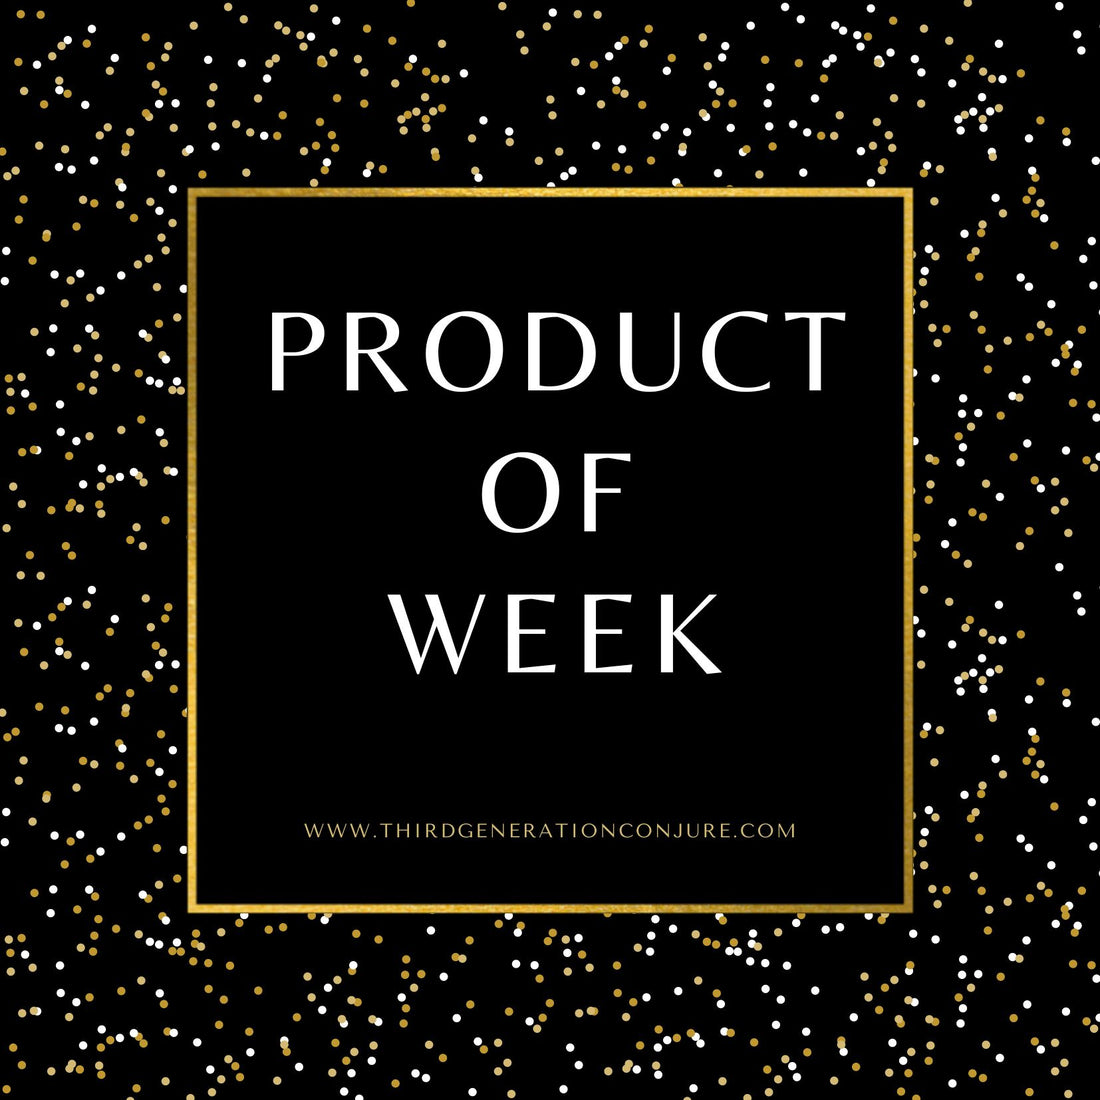  Product of the week!